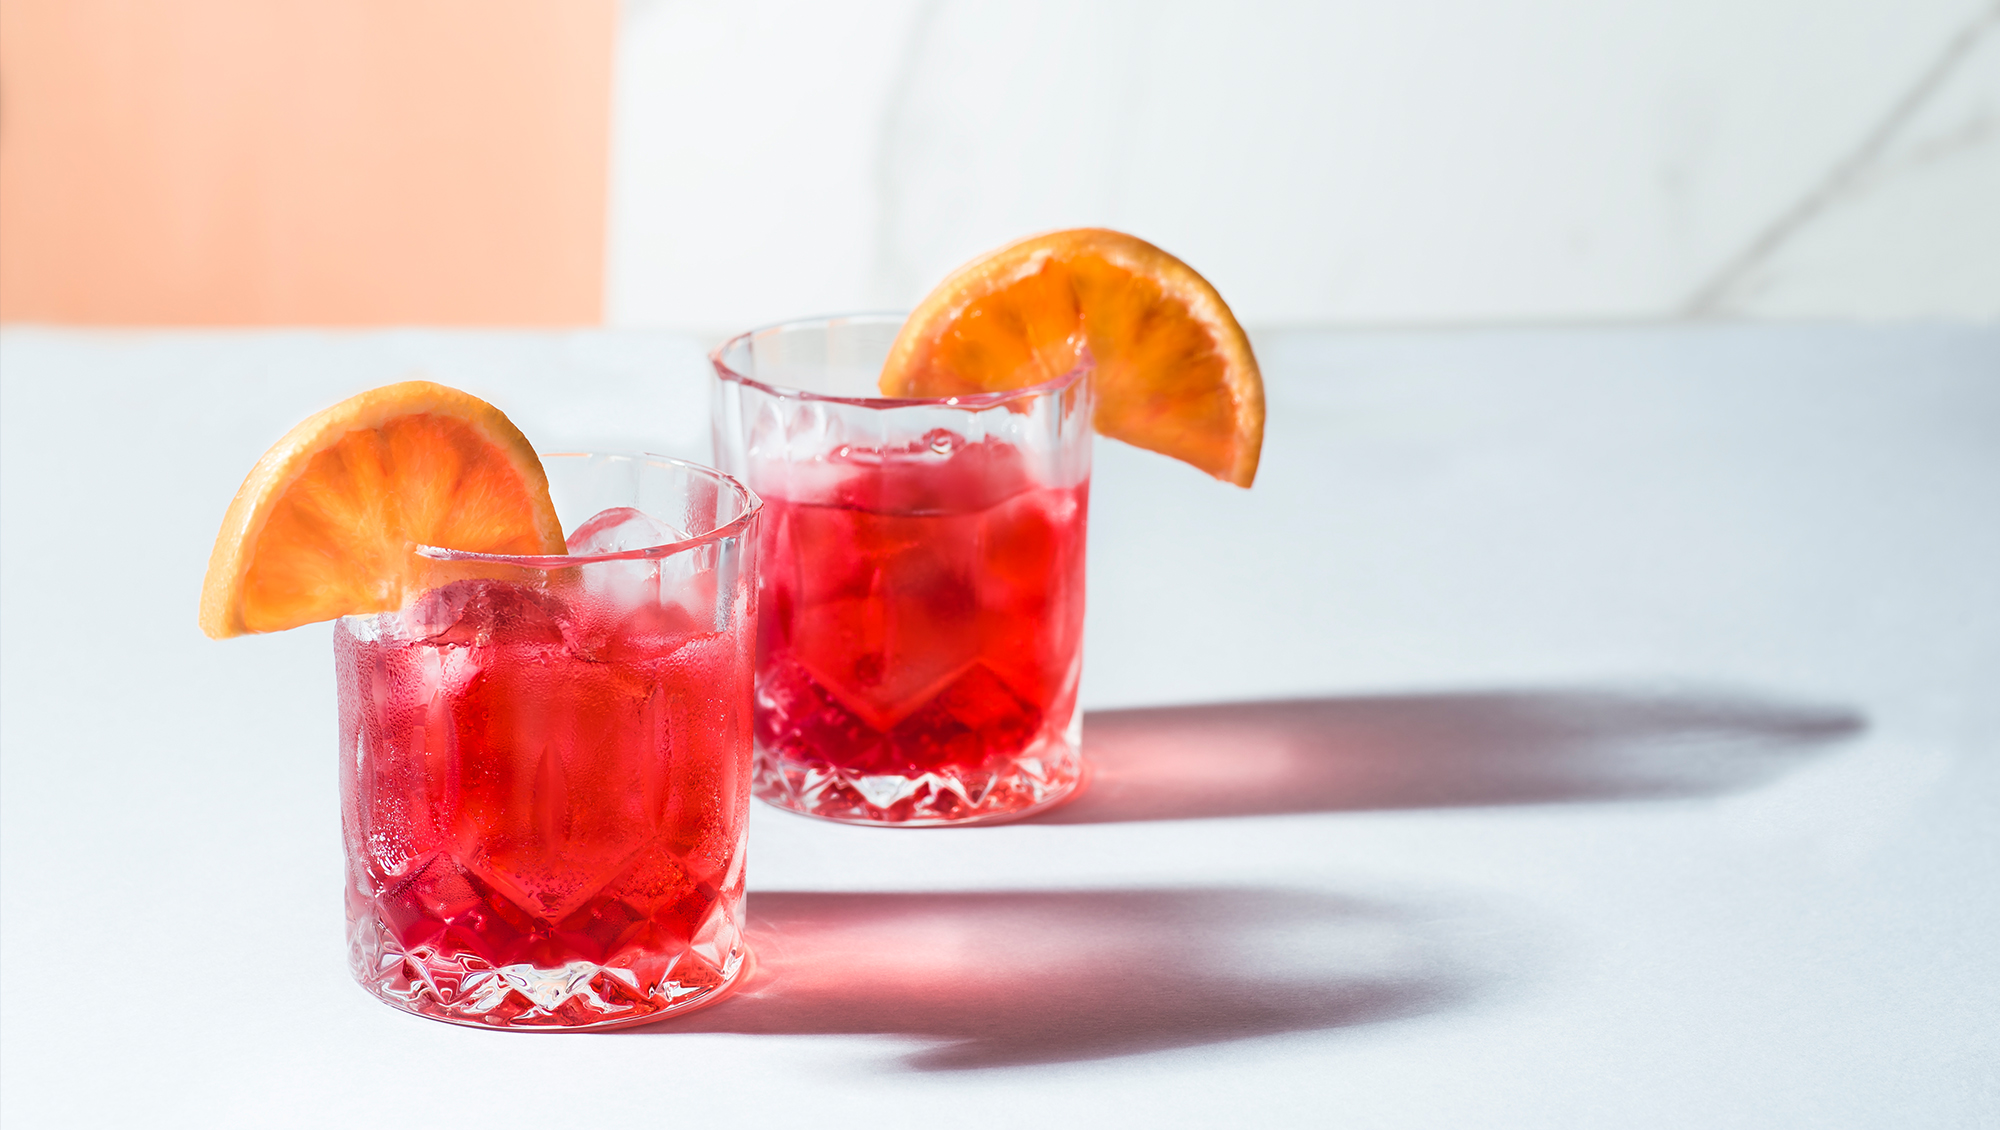 Tea Infused Cocktails Are The Latest Drink Trend 